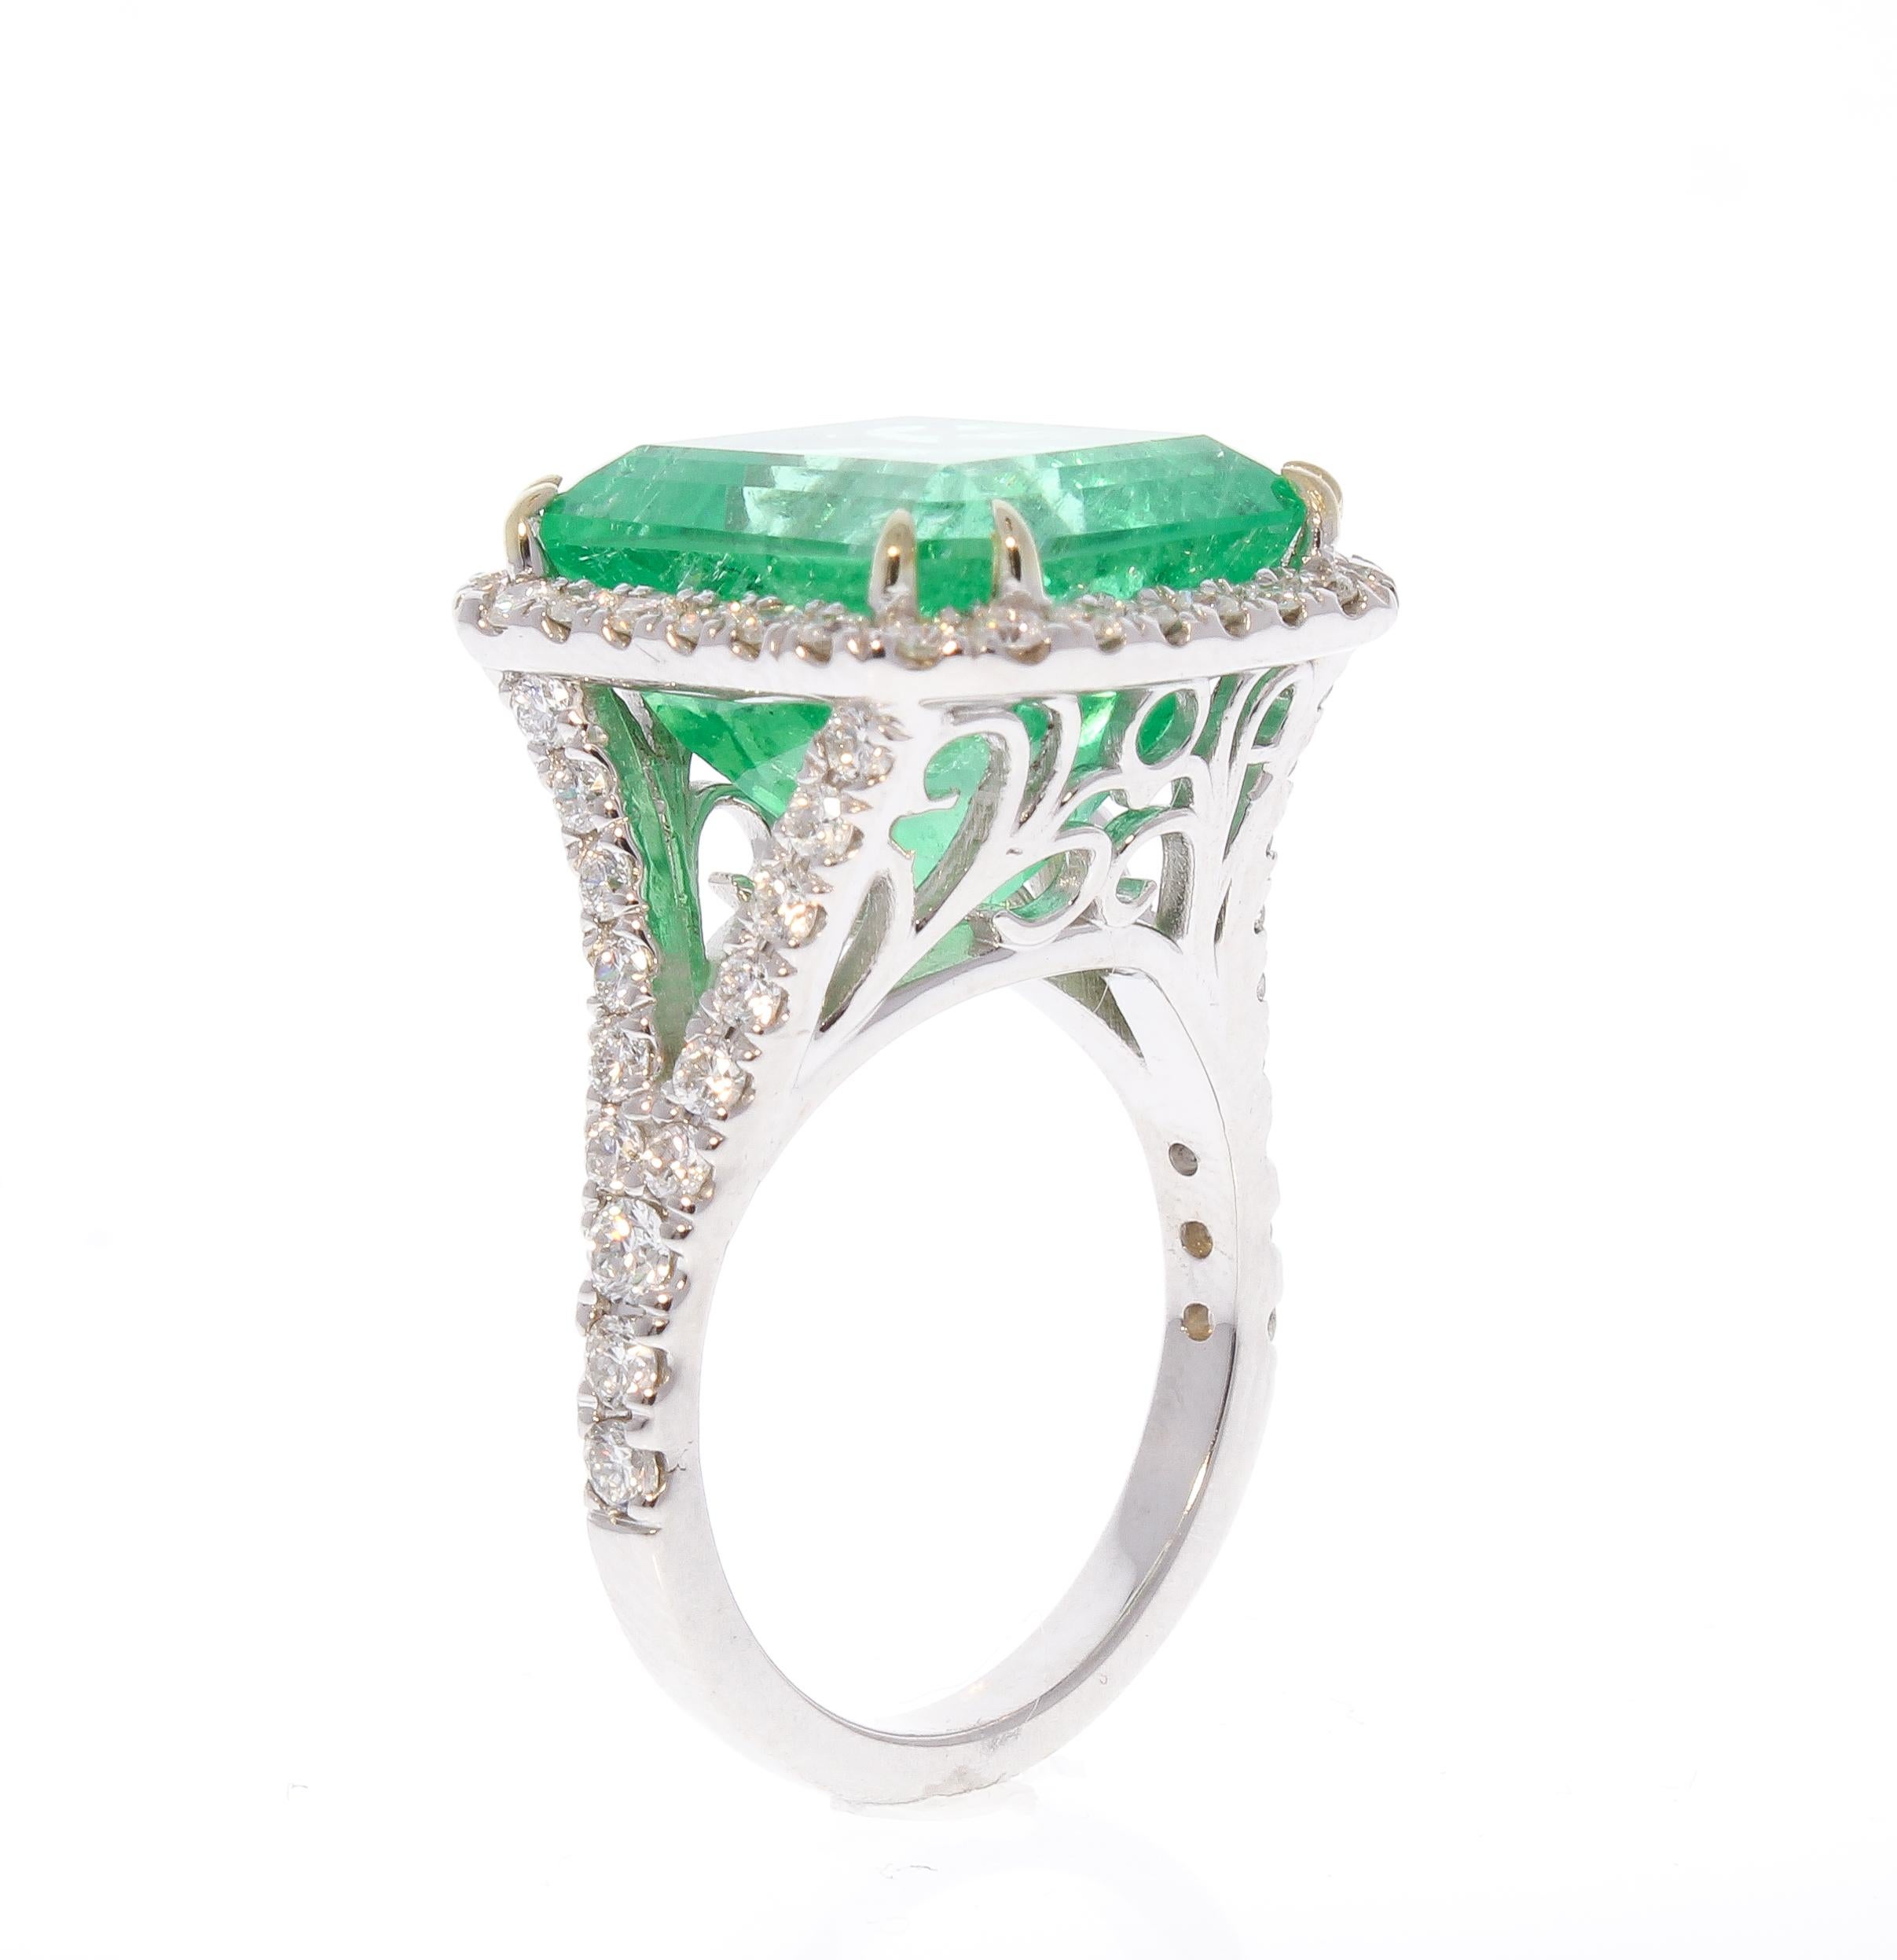 This lavish cocktail ring features a 13.06 carat emerald; the gem source is Colombia, known for the top source for emeralds in the world, the luster, material, and yellowish-green color are superb. Sparkling round brilliant cut diamonds are prong